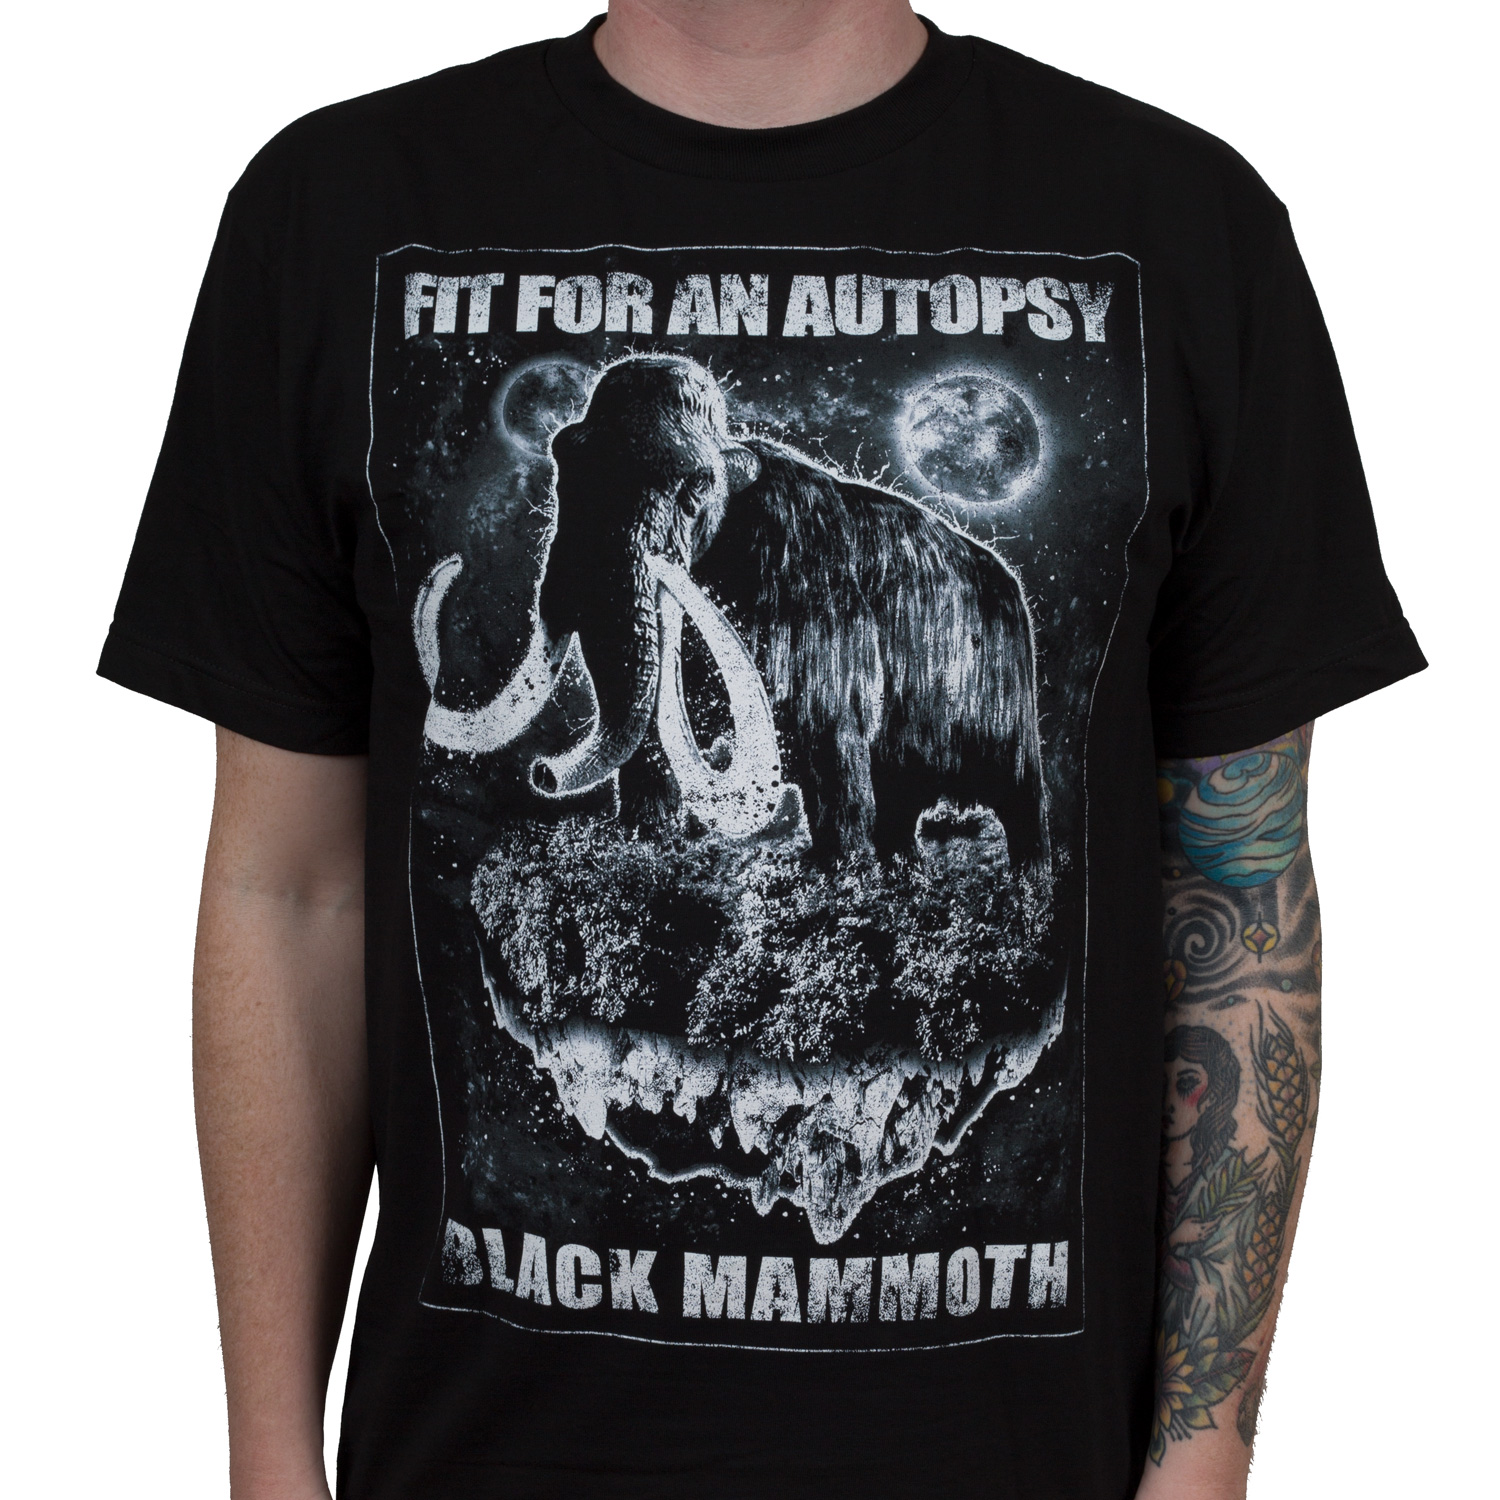 Black Mammoth Song Fit For An Autopsy Graphic Unisex T-Shirt, Fit For An Autopsy Black Mammoth Graphic Merch